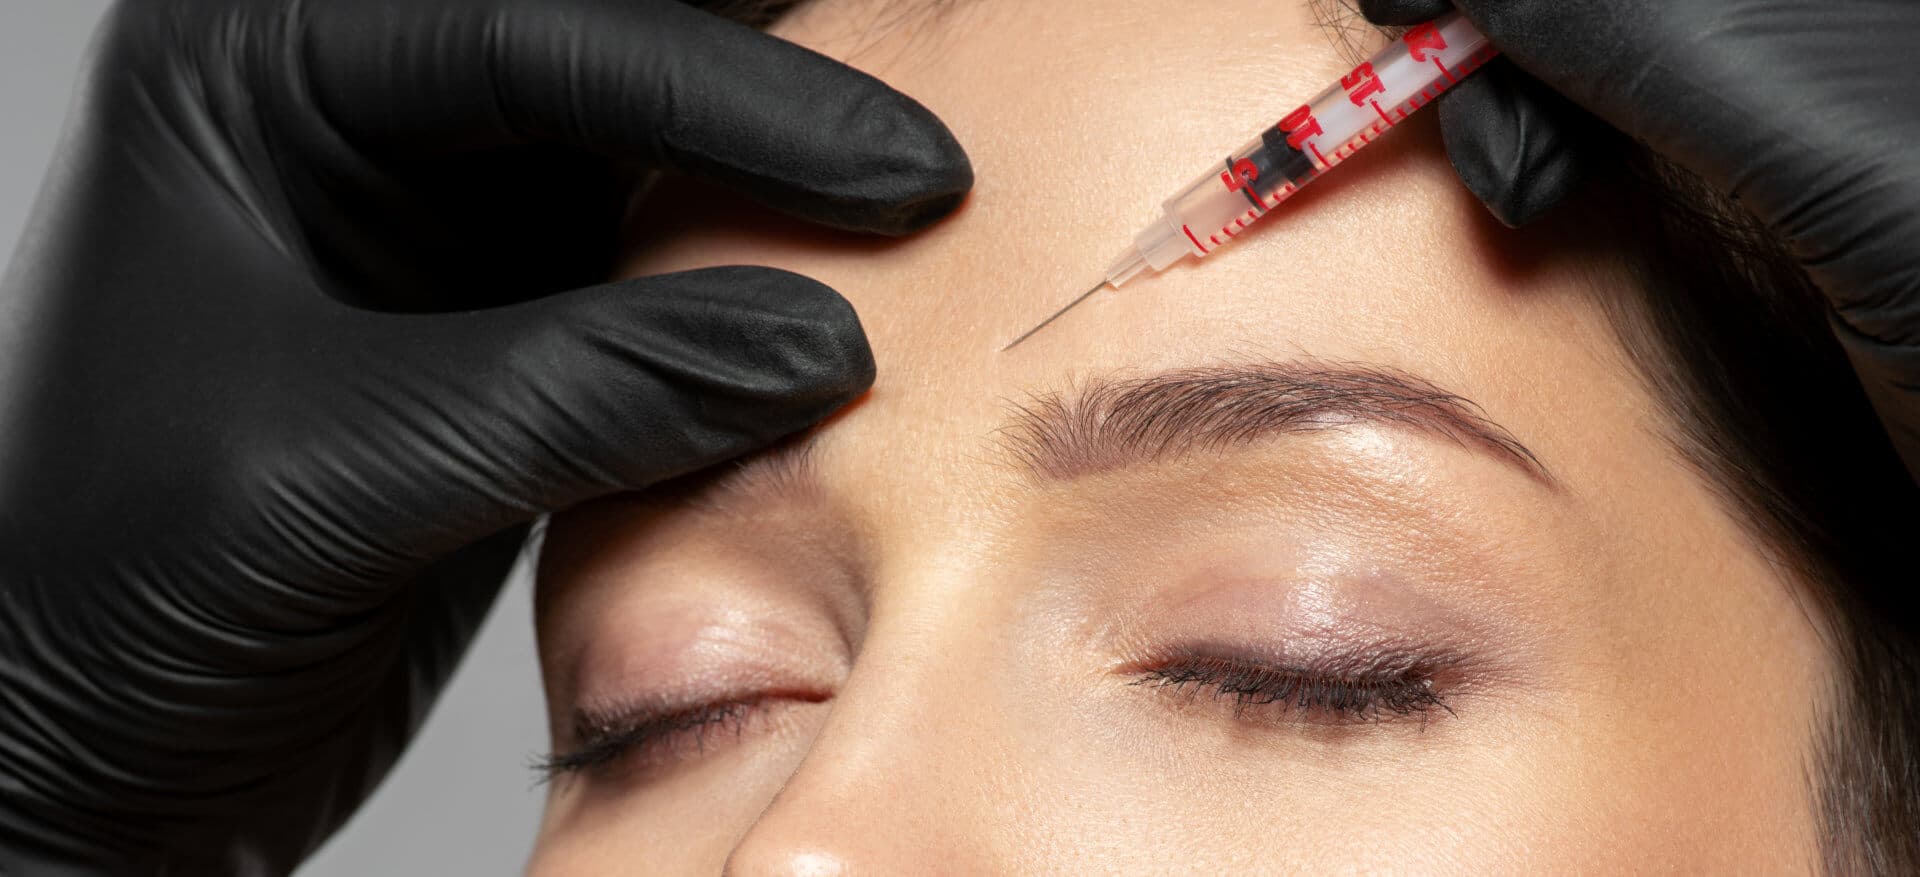 Young caucasian woman getting botox cosmetic injection in a forehead